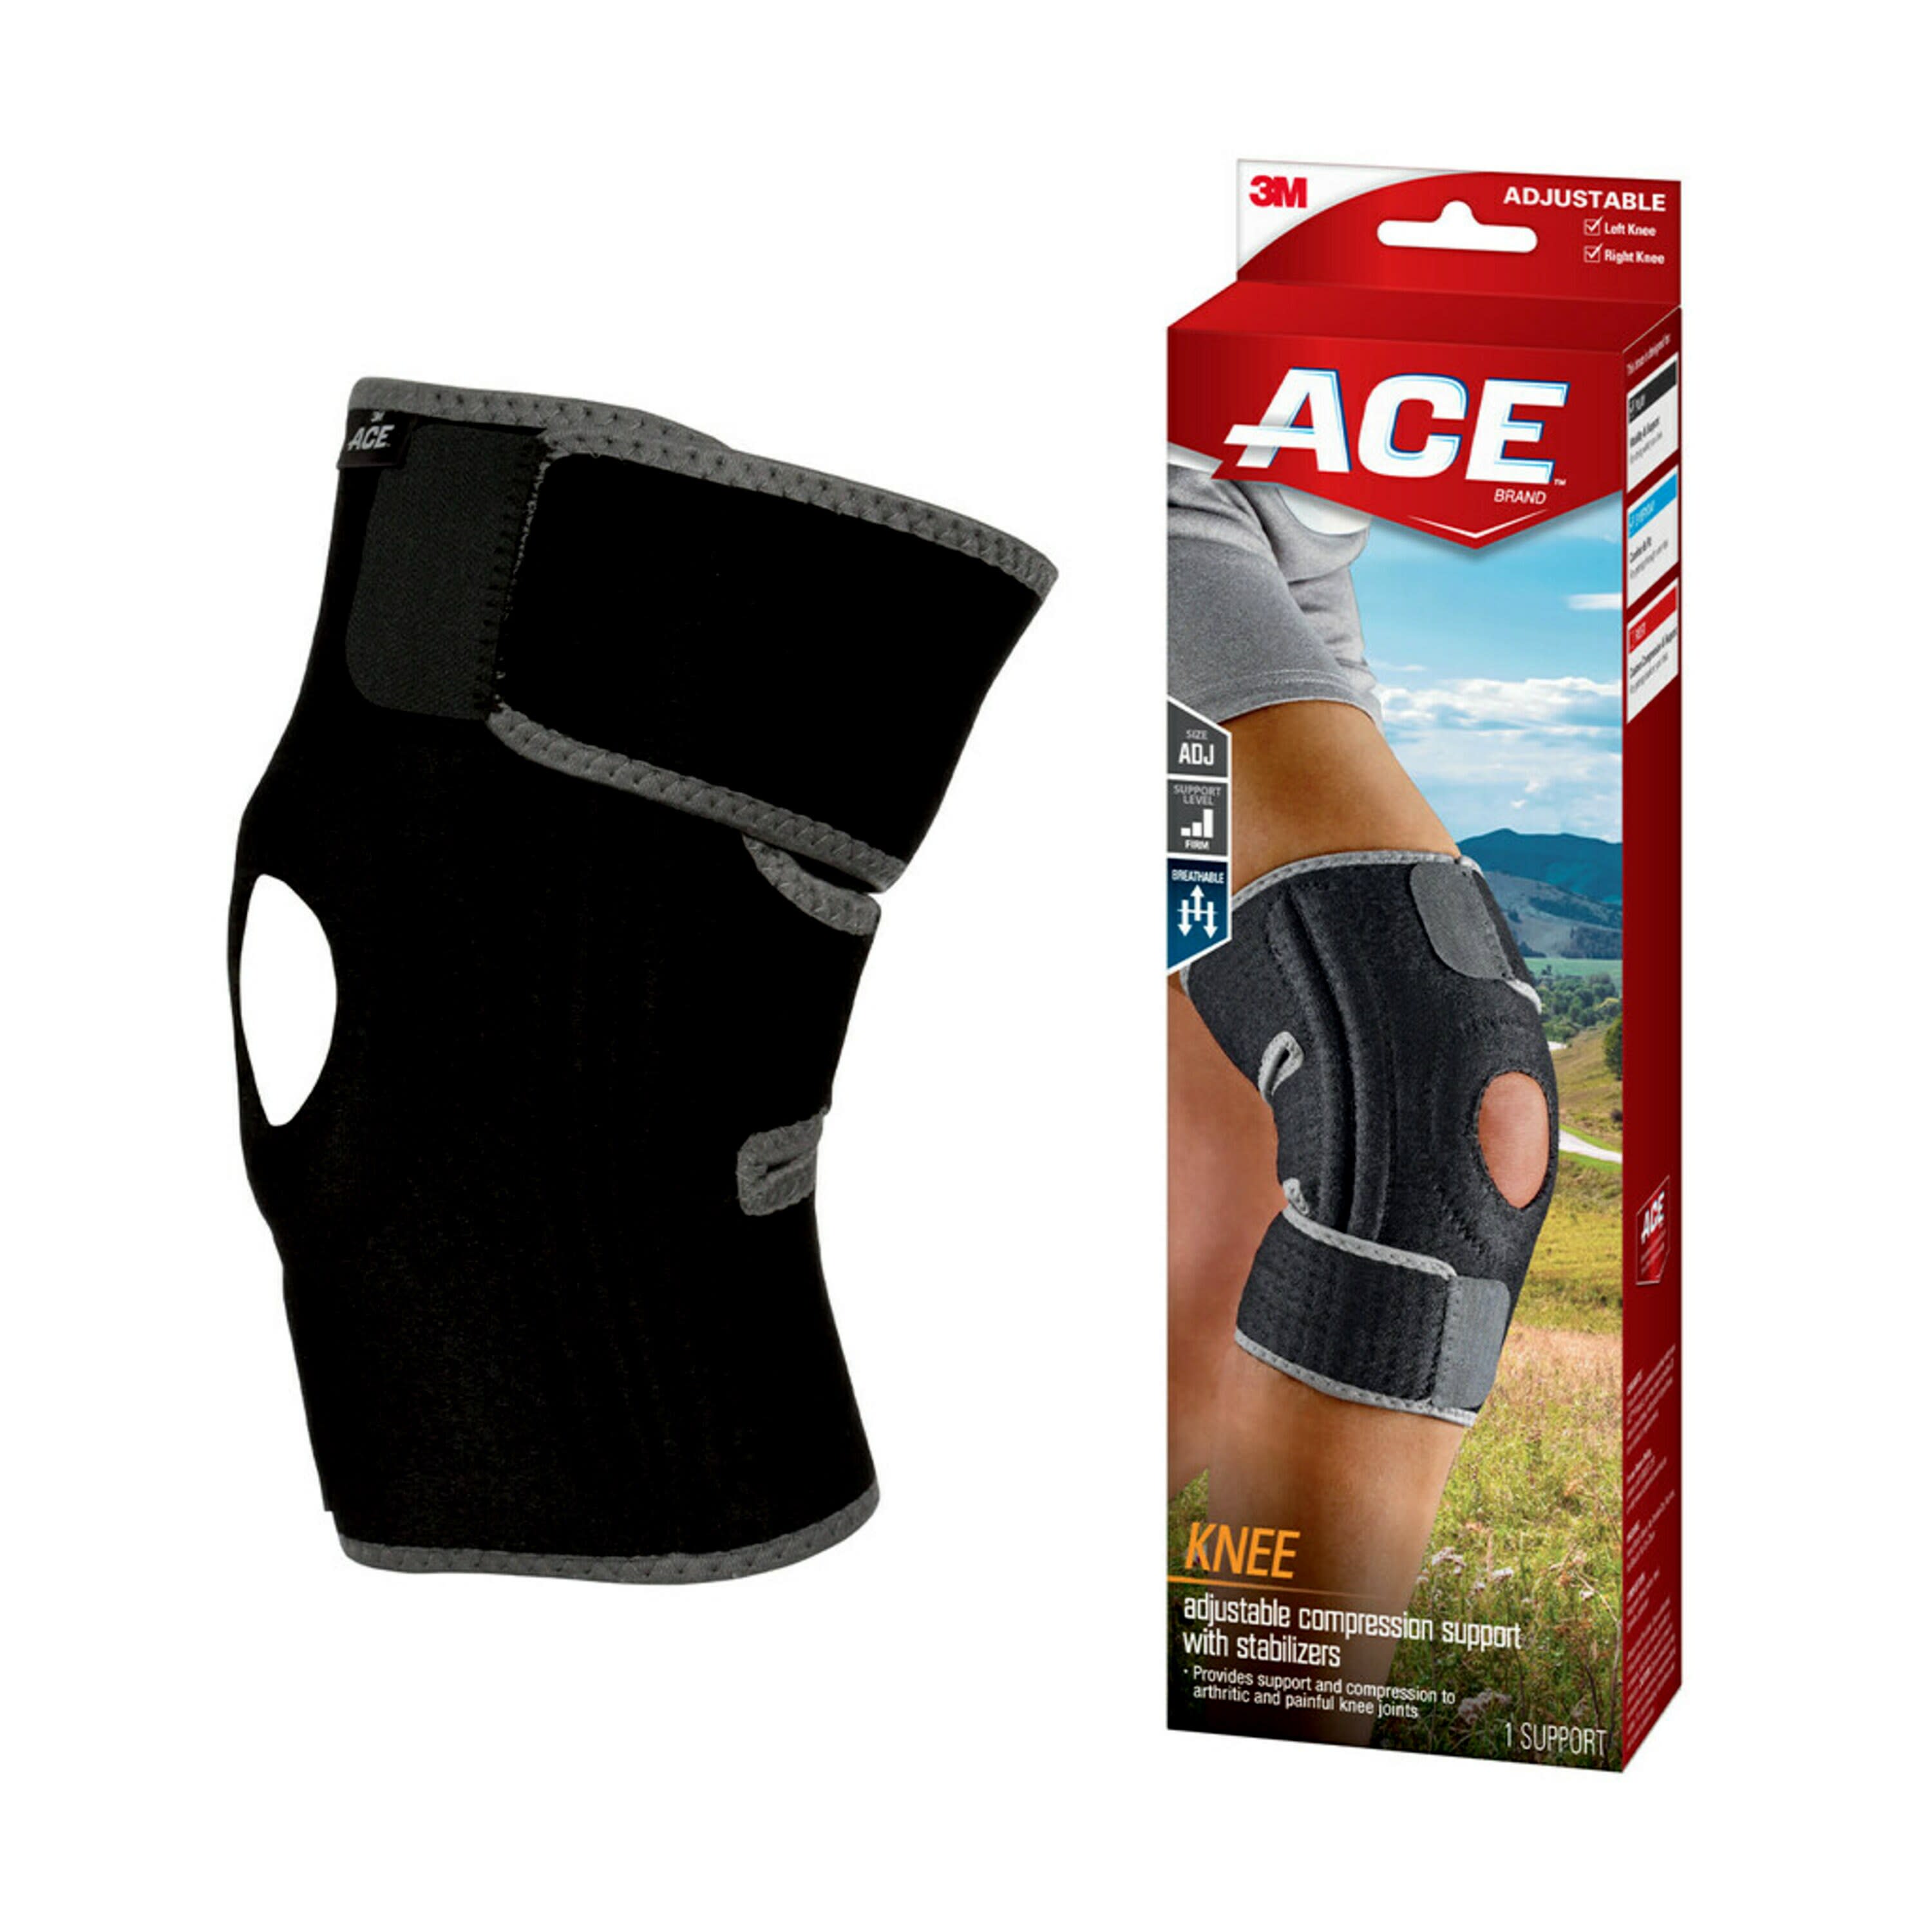 ACE Brand Adjustable Compression Knee Support with Stabilizers, Black/Gray – One Size - image 3 of 12